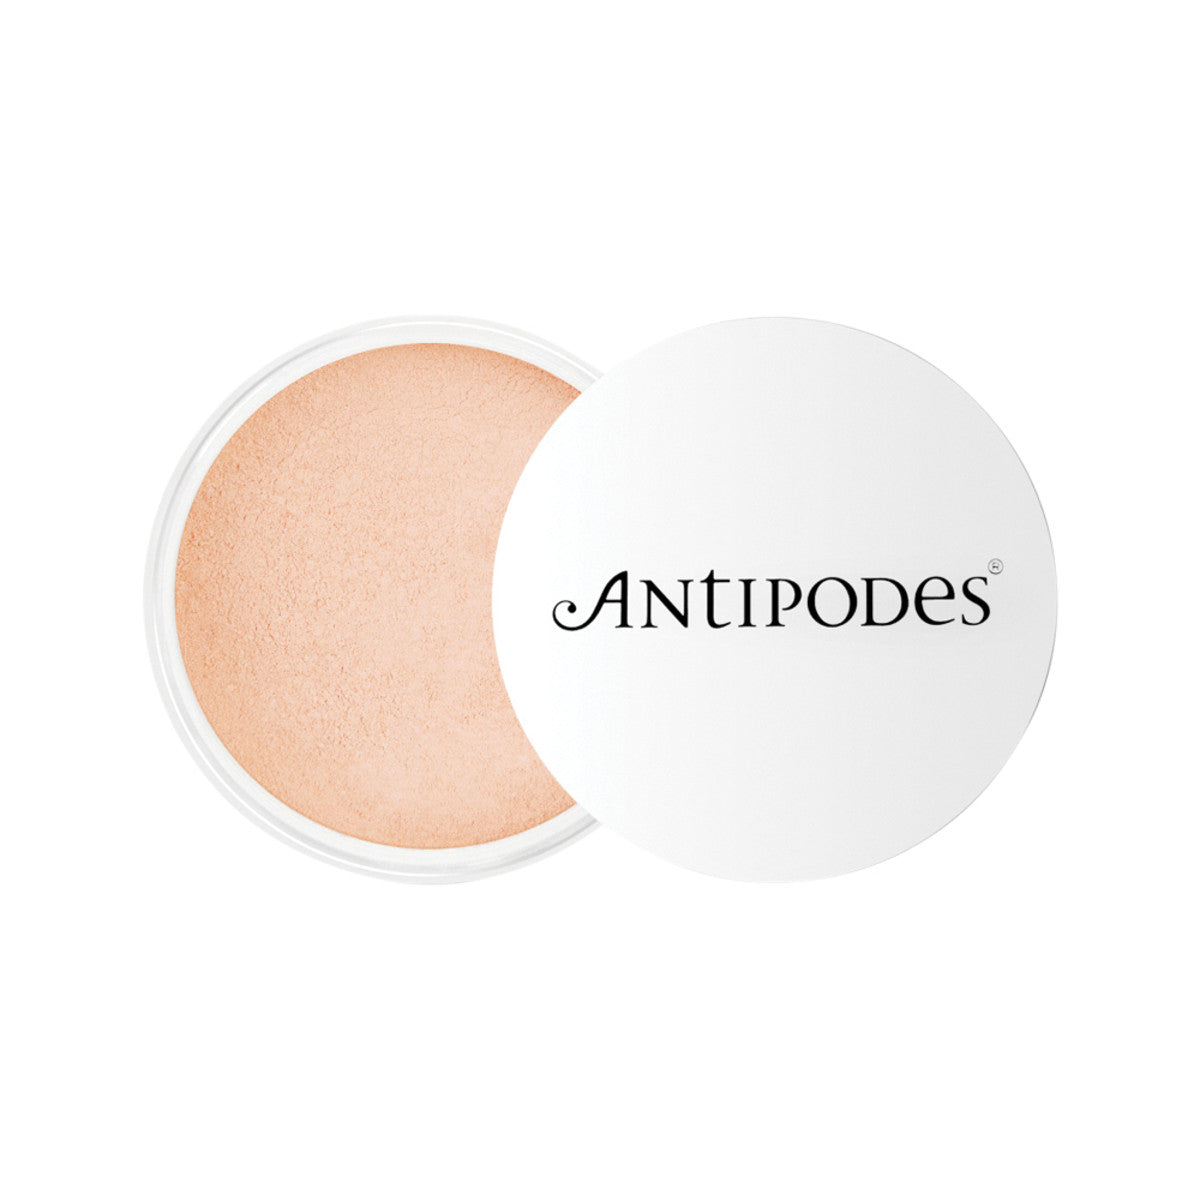 Antipodes - Mineral Foundation Pale Pink